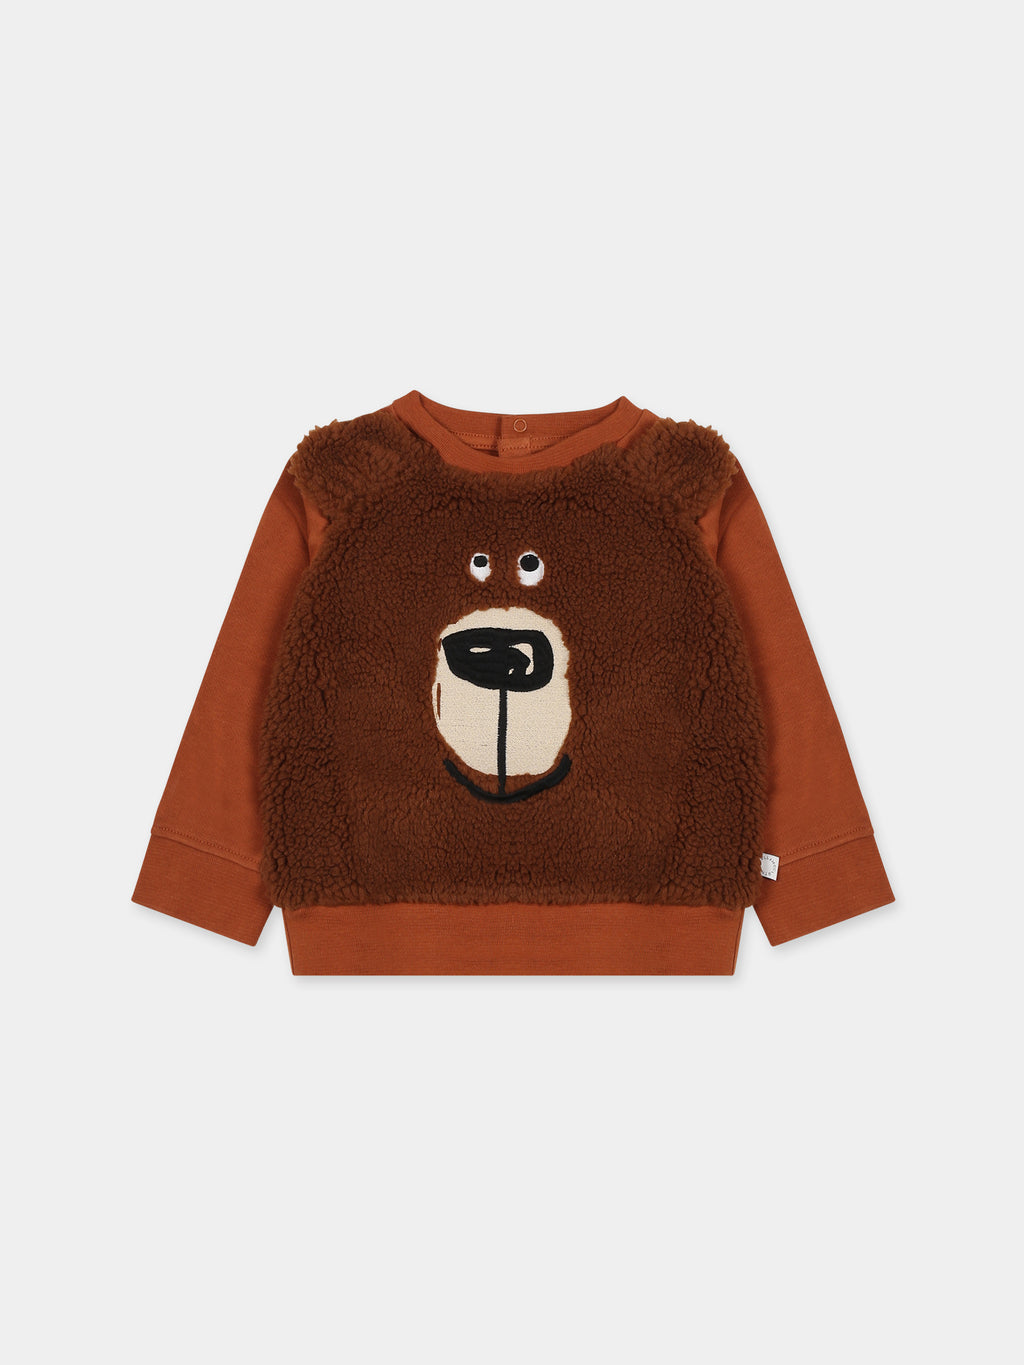 Brown sweatshirt for baby boy with bear